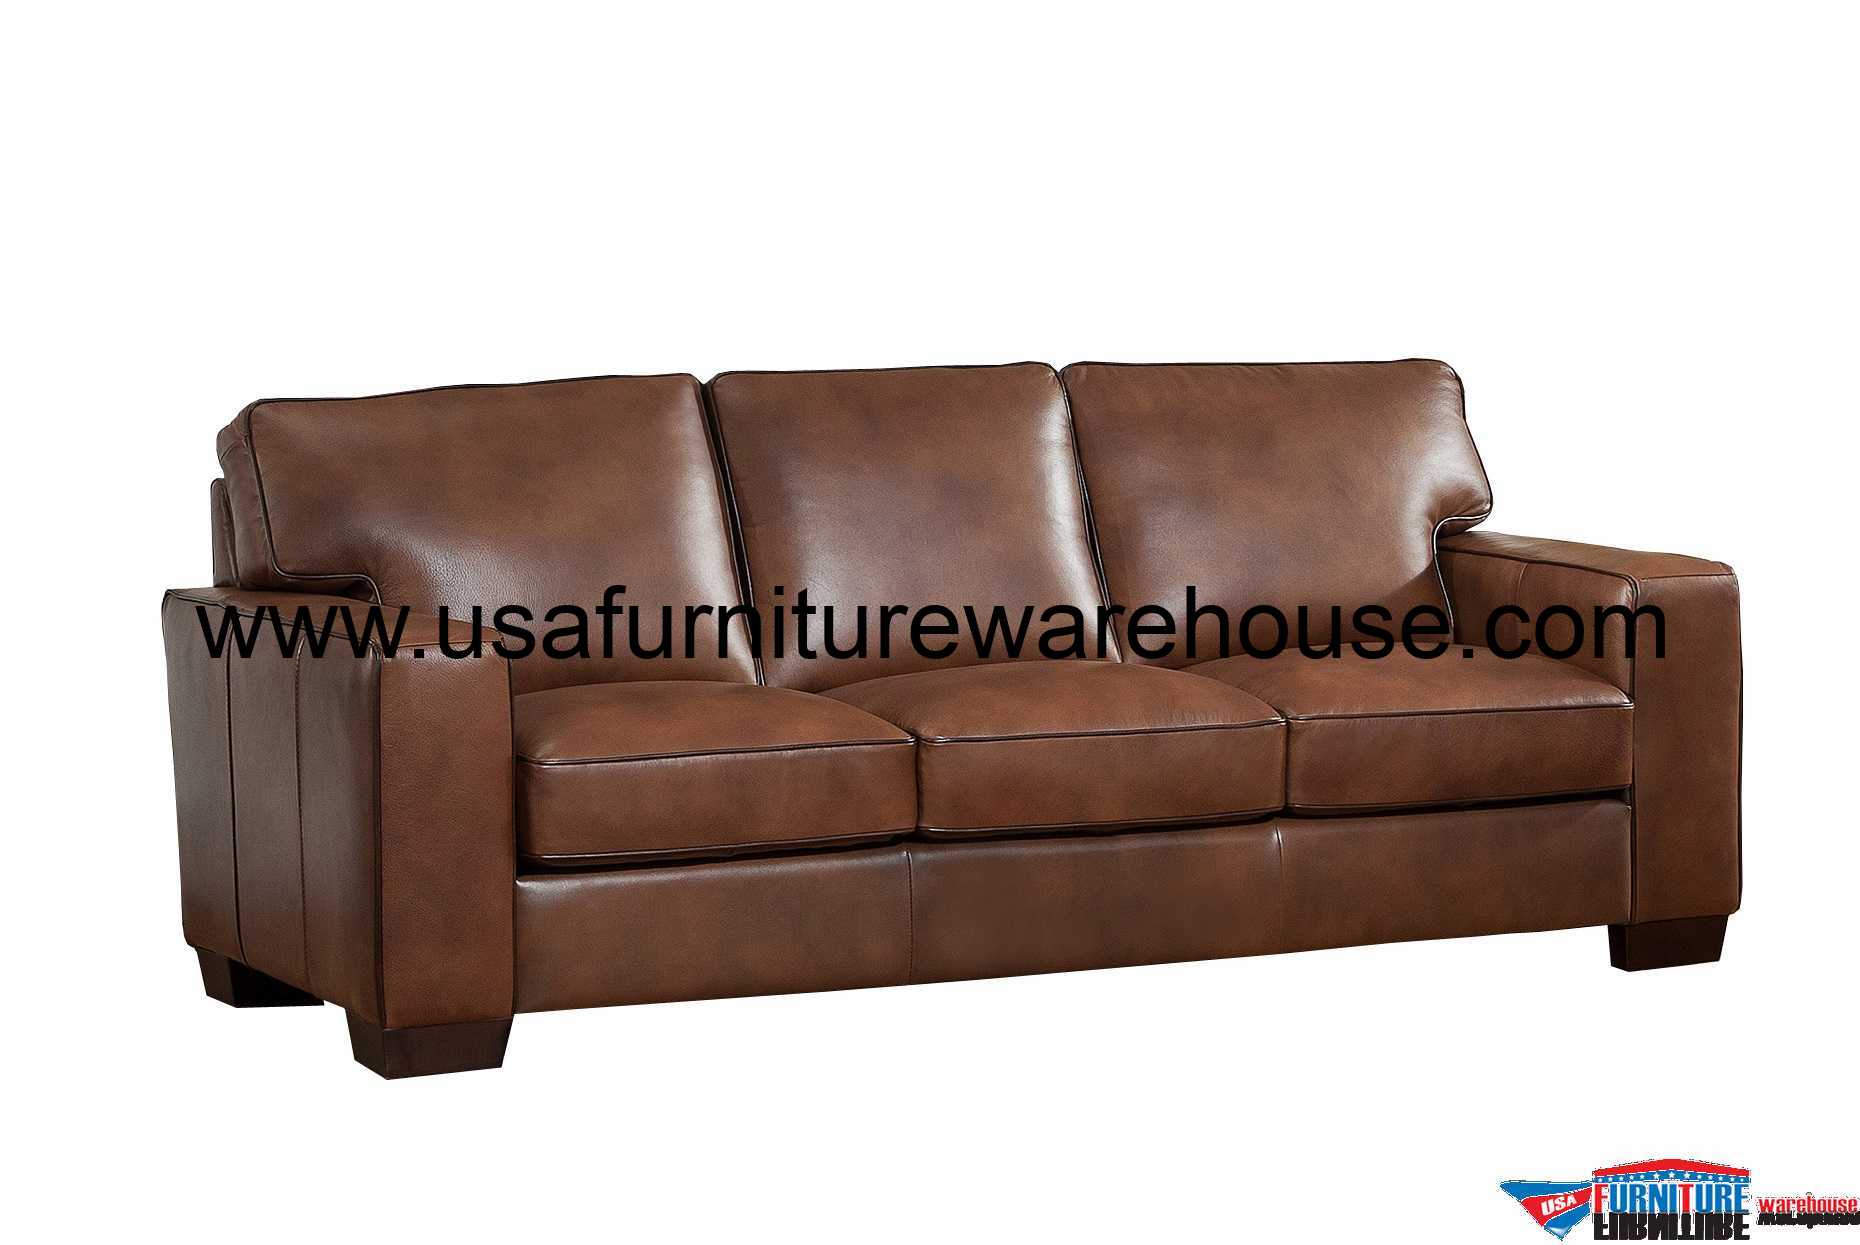 80 inch brown leather sofa